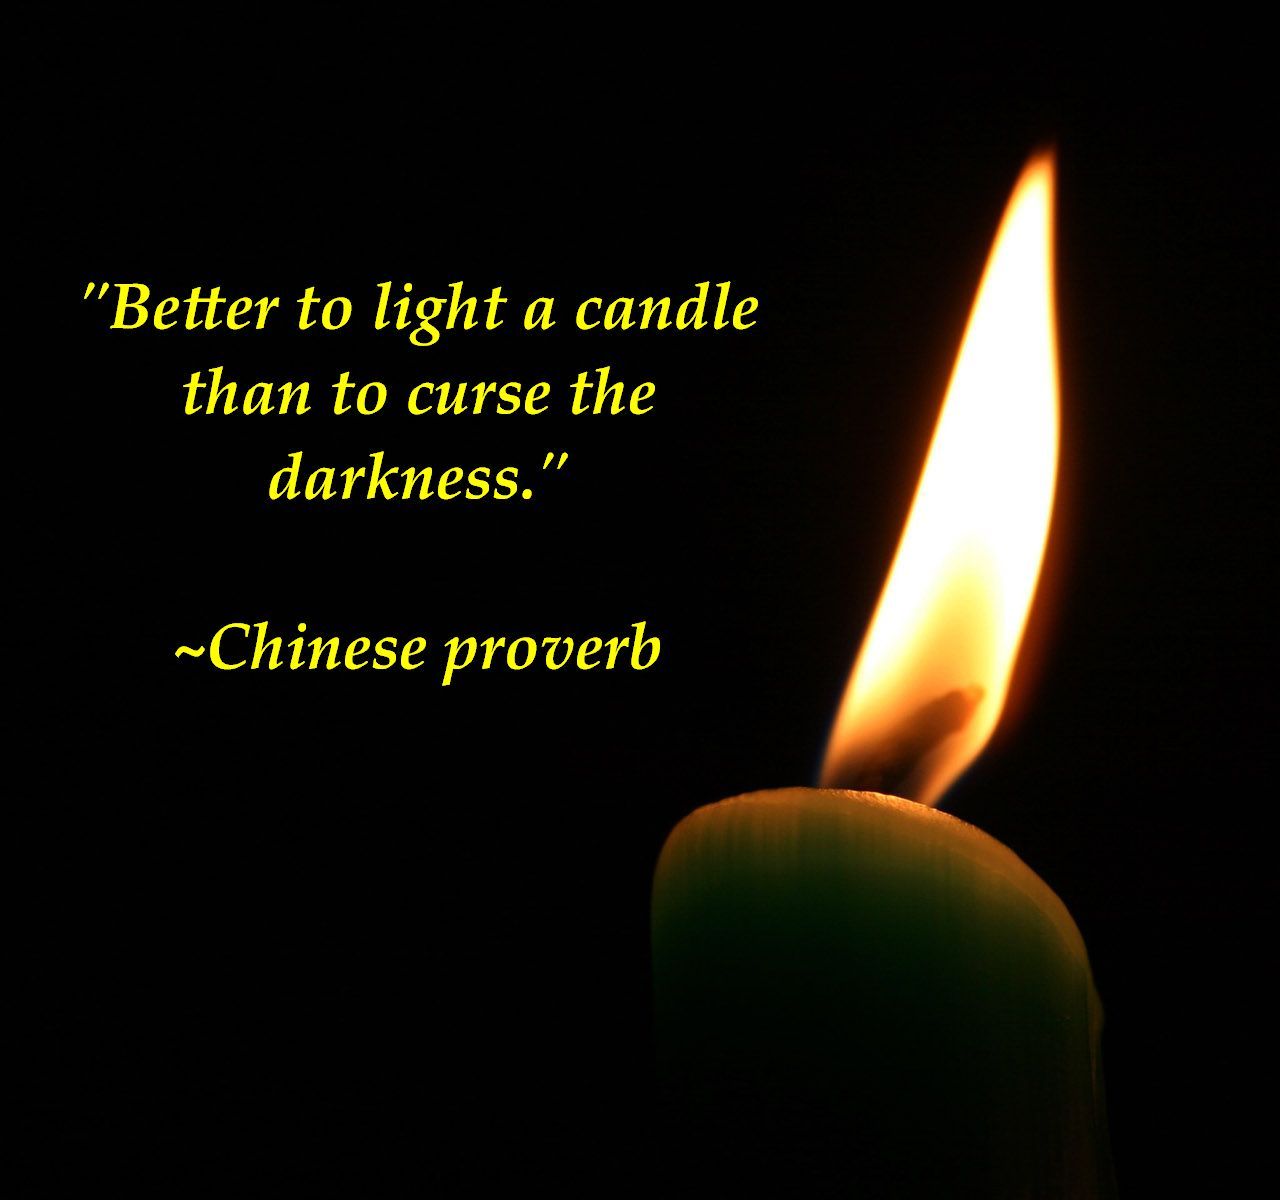 Better To Light A Candle Than Curse The Darkness - Its Better To Light A Ca...